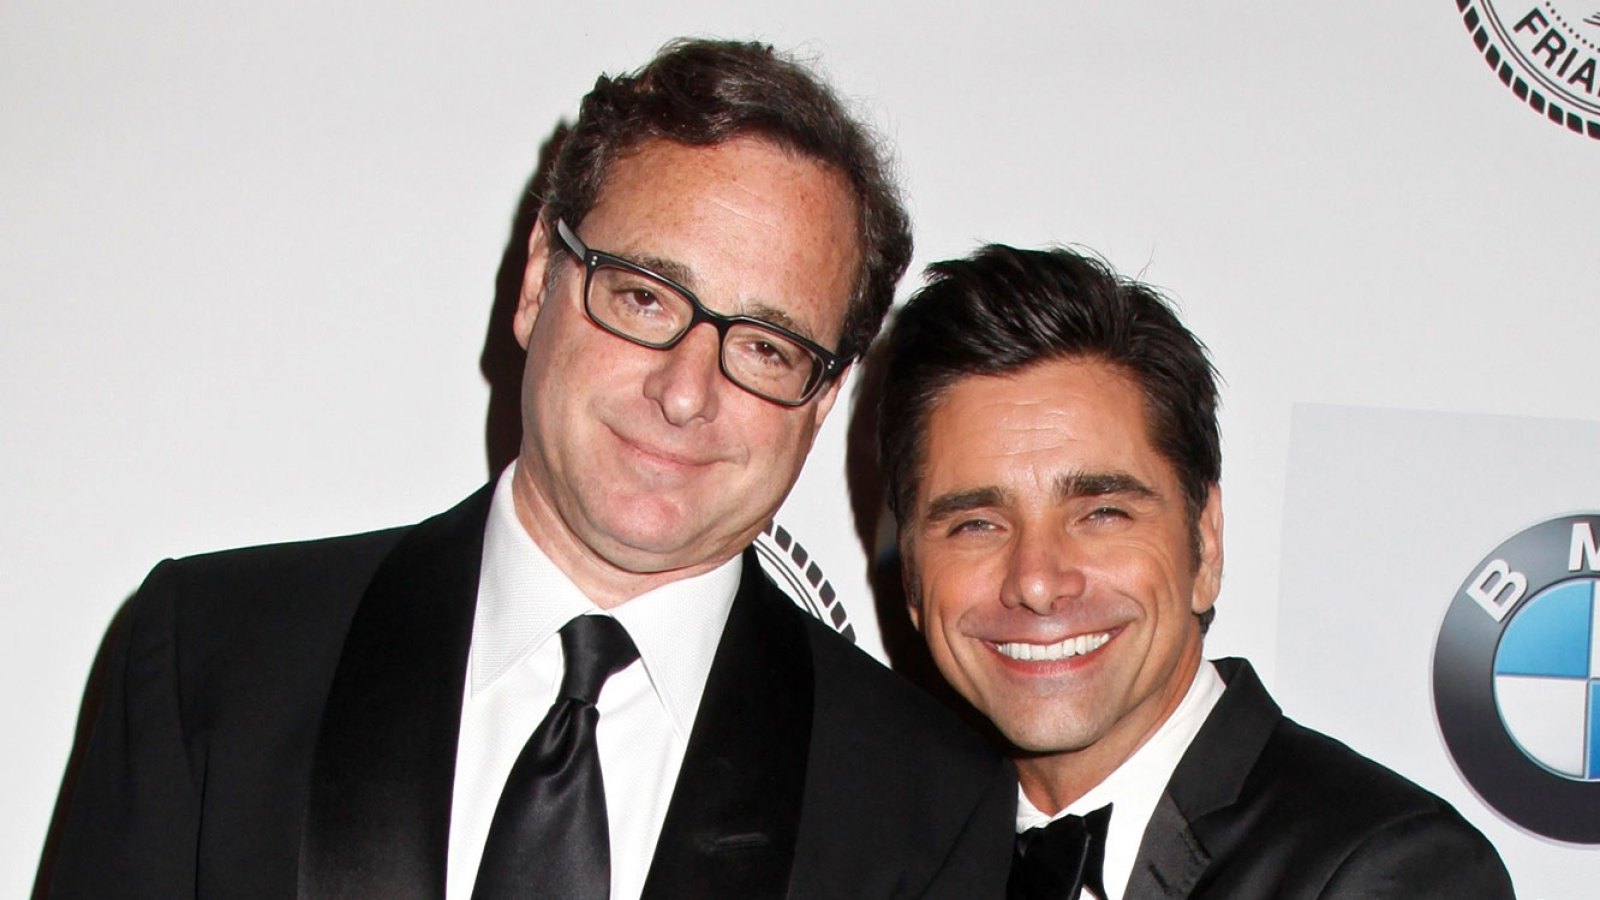 John Stamos Is Disappointed Late Bob Saget Was Left Out of Tony Awards 2022's In Memoriam Segment